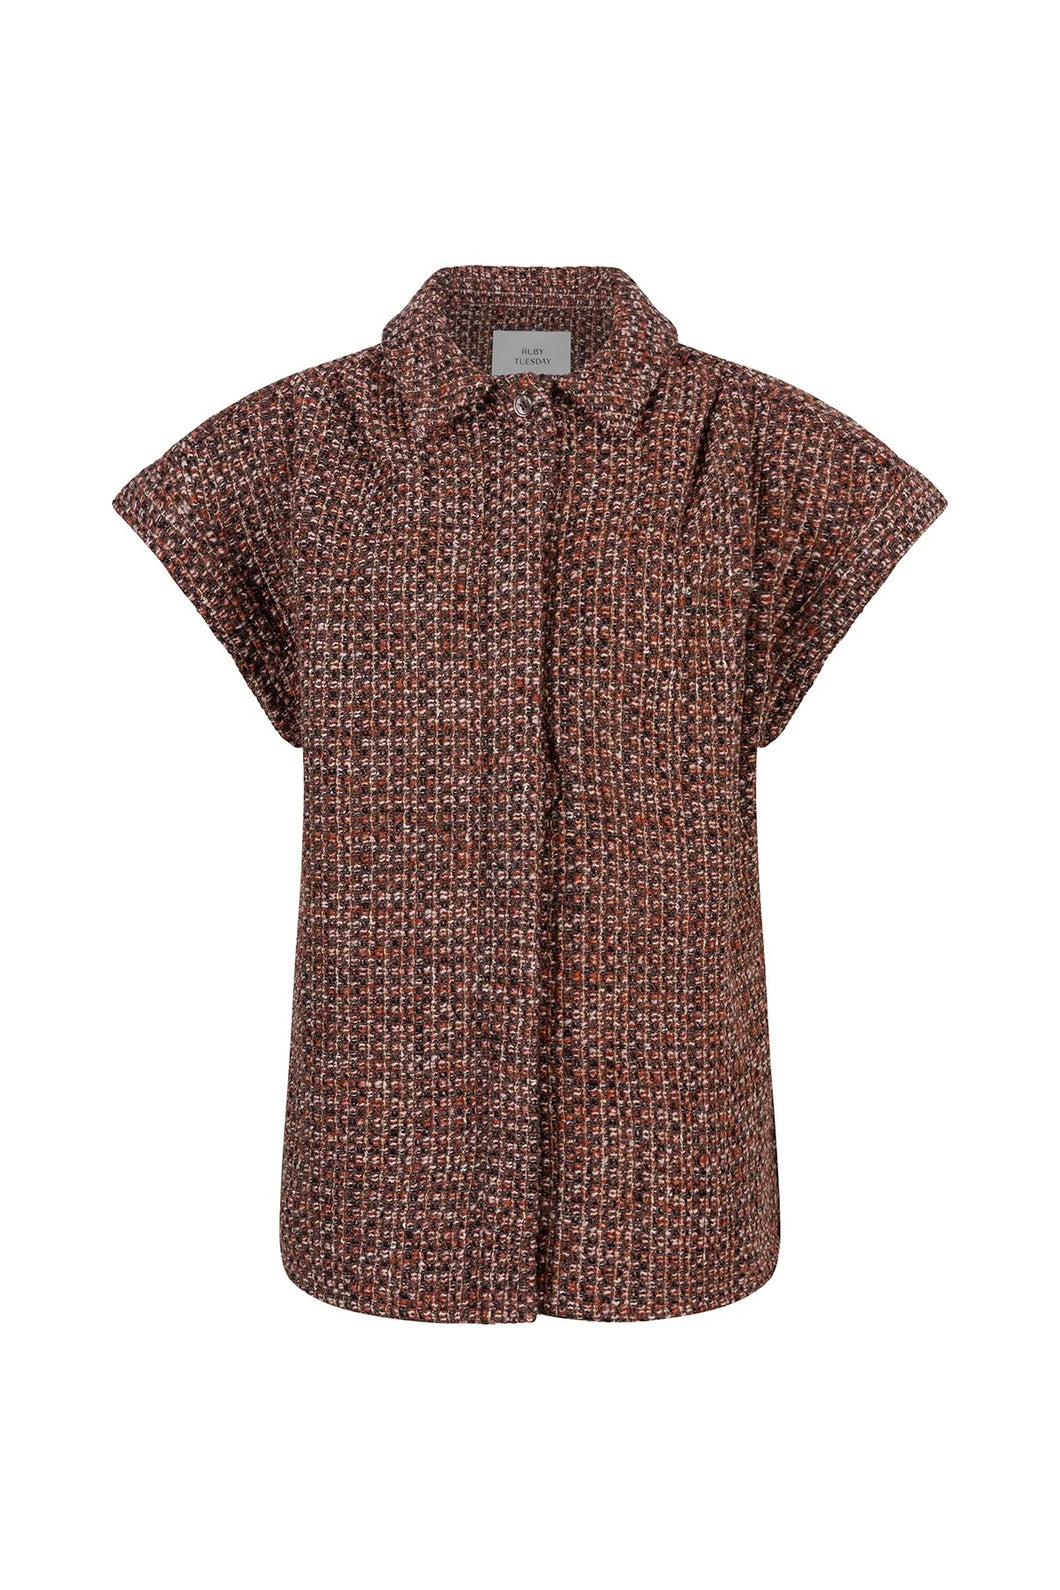 Ruby Tuesday Chama Oversized Short Sleeve Shirt  Red Ochre T309-1208 nu